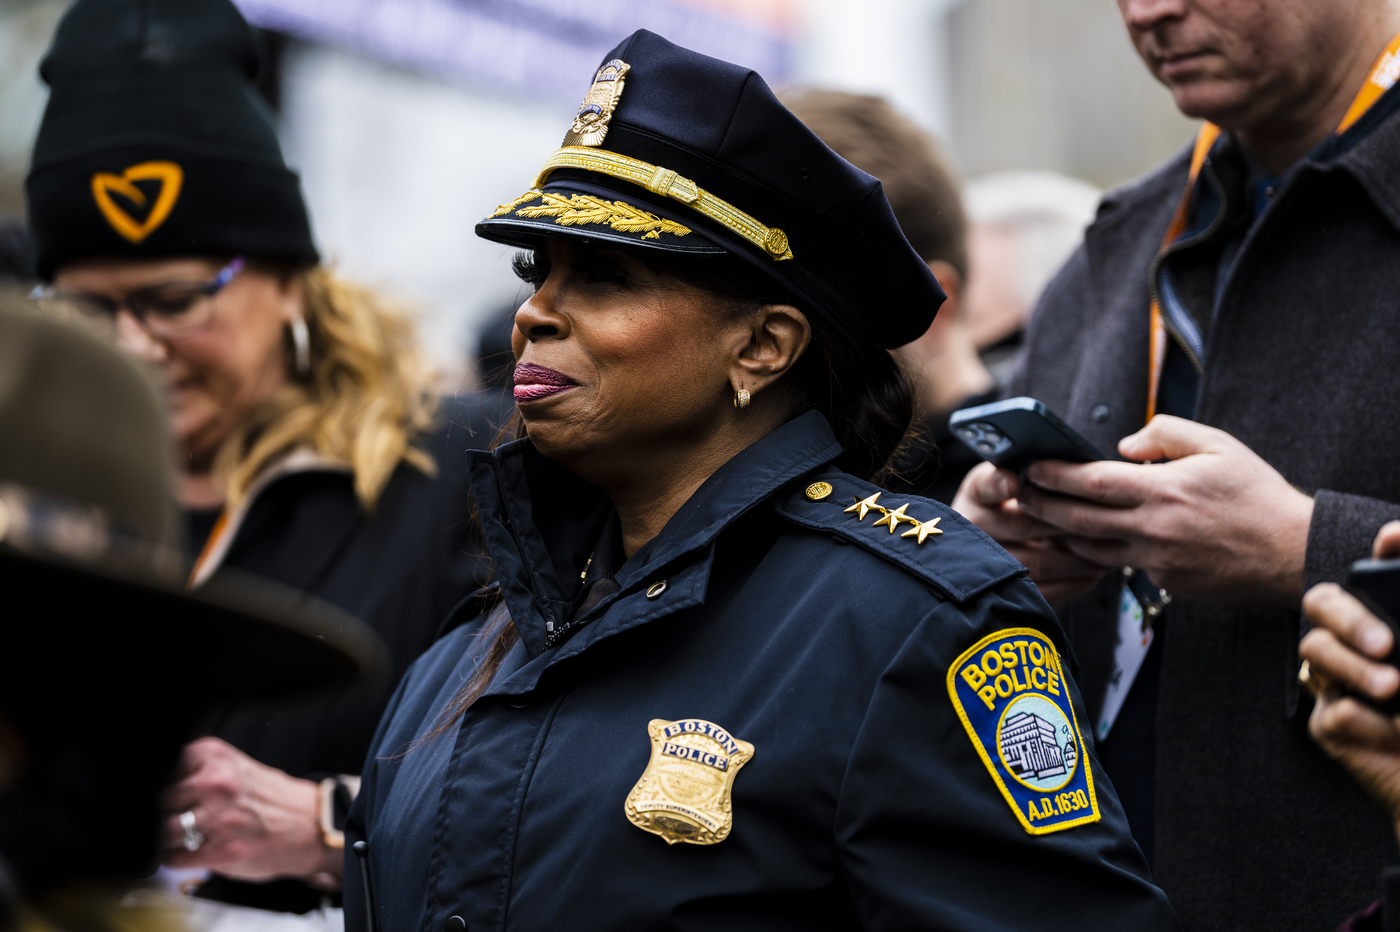 A Boston Police Officers smiles